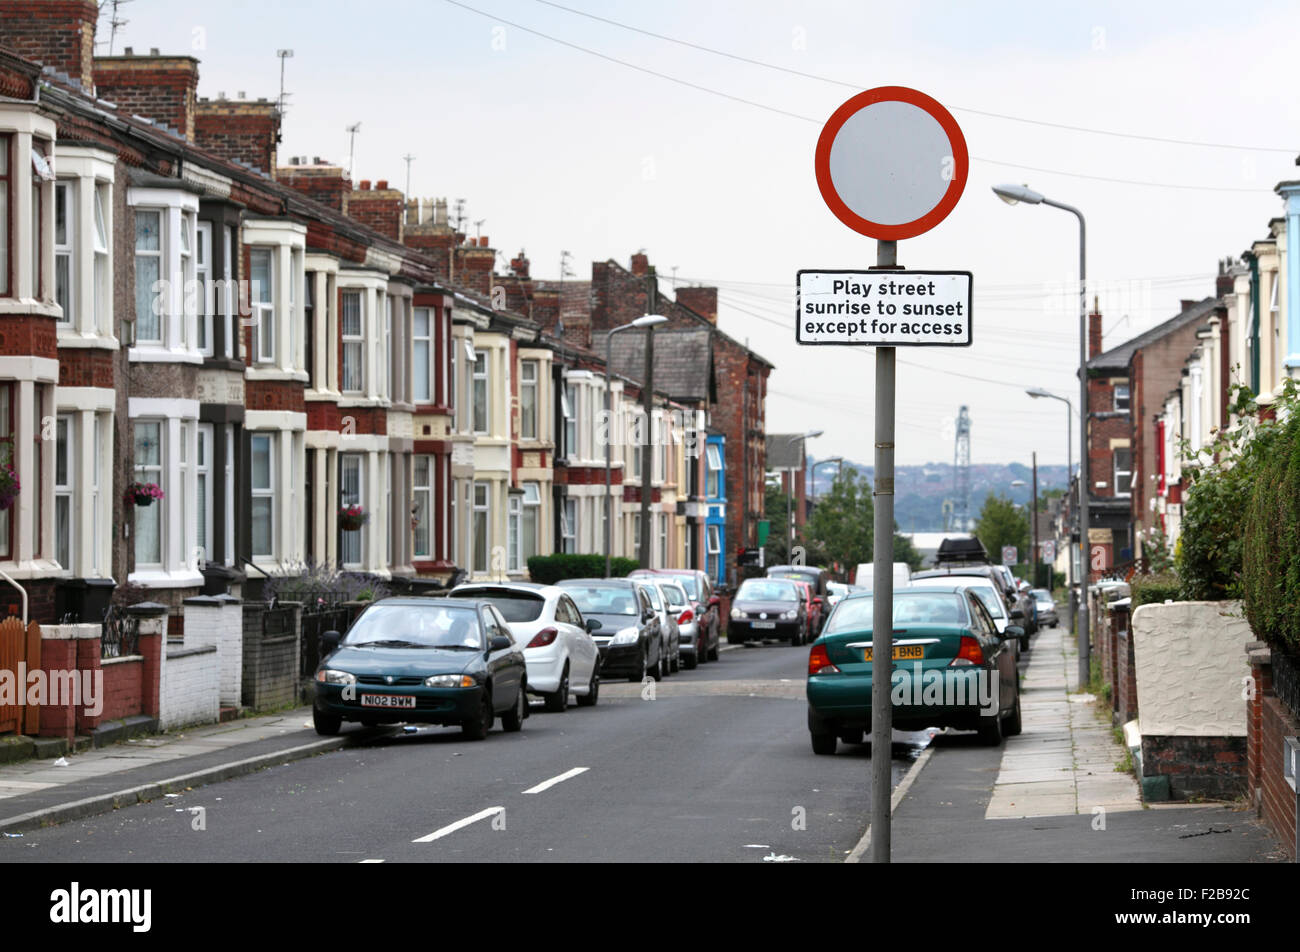 'Play street' road sign, Beatrice Street, Bootle, Liverpool 20. Stock Photo